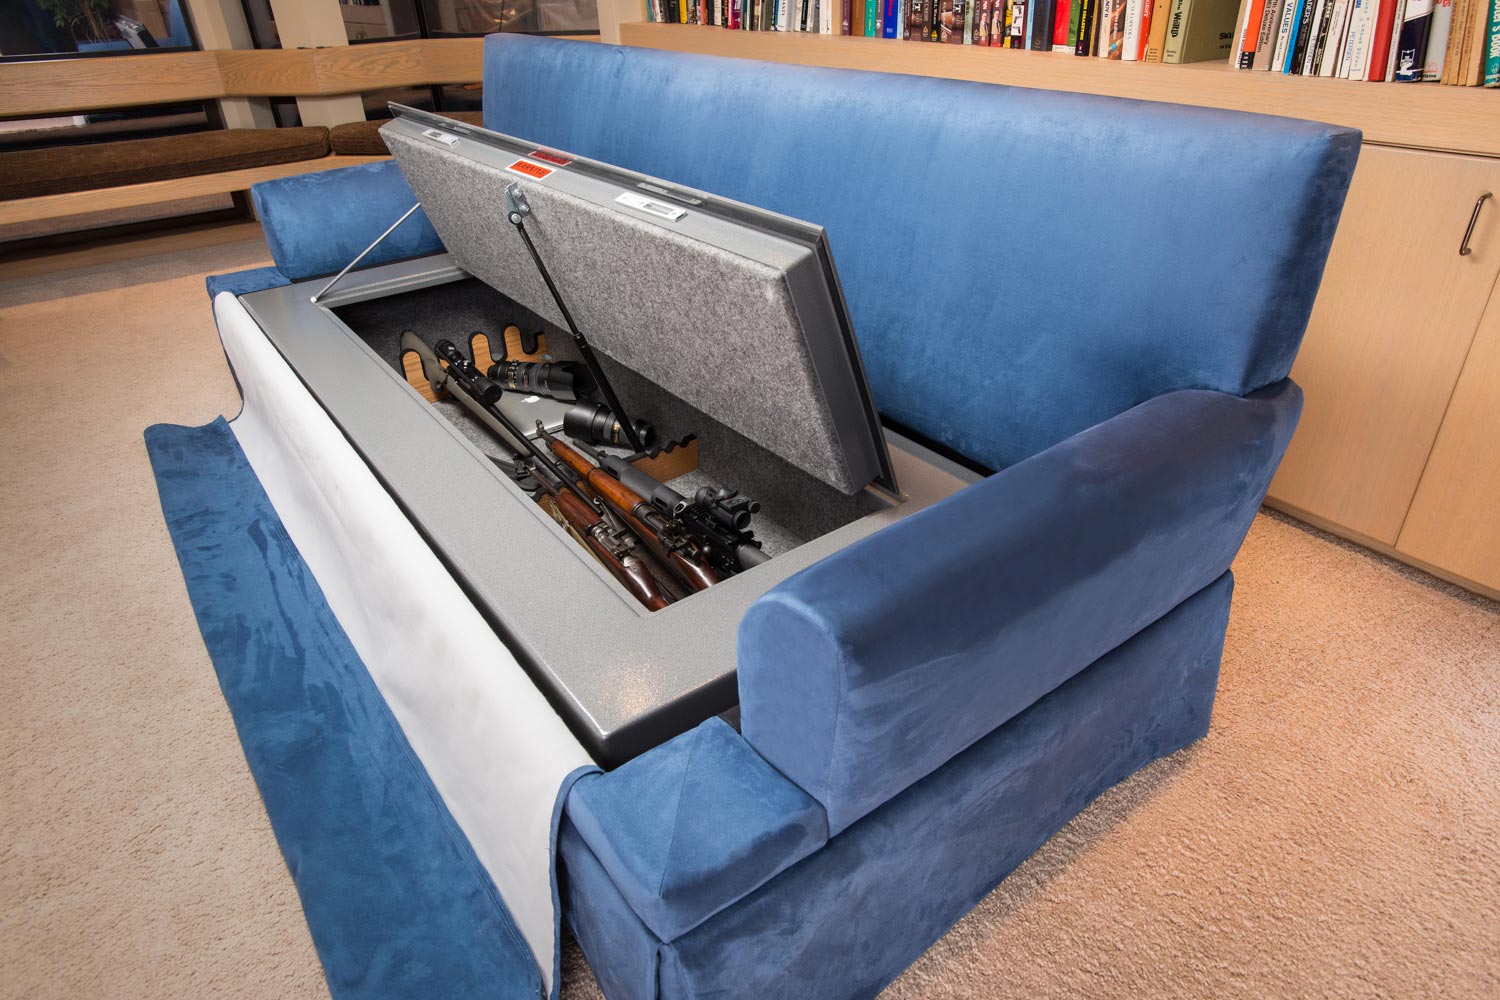 couchbunker bullet resistant sofa gun safe heracles research corporation 0012